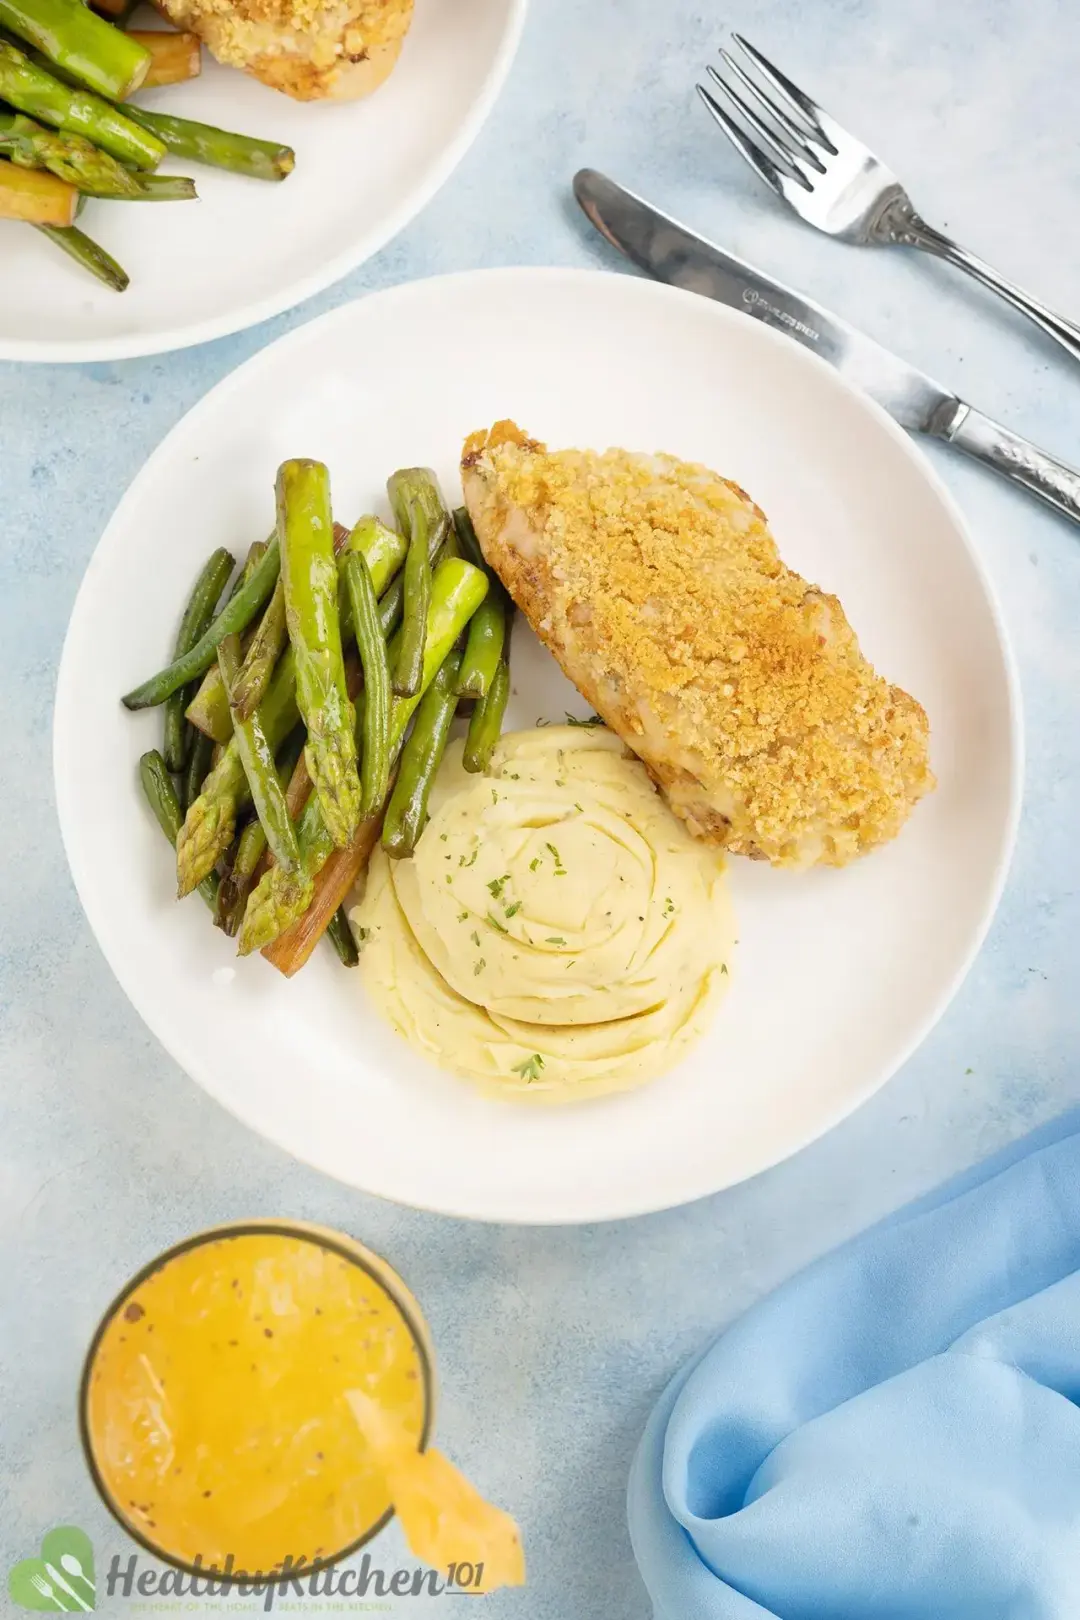 Is This Longhorn Parmesan Crusted Chicken Recipe Healthy